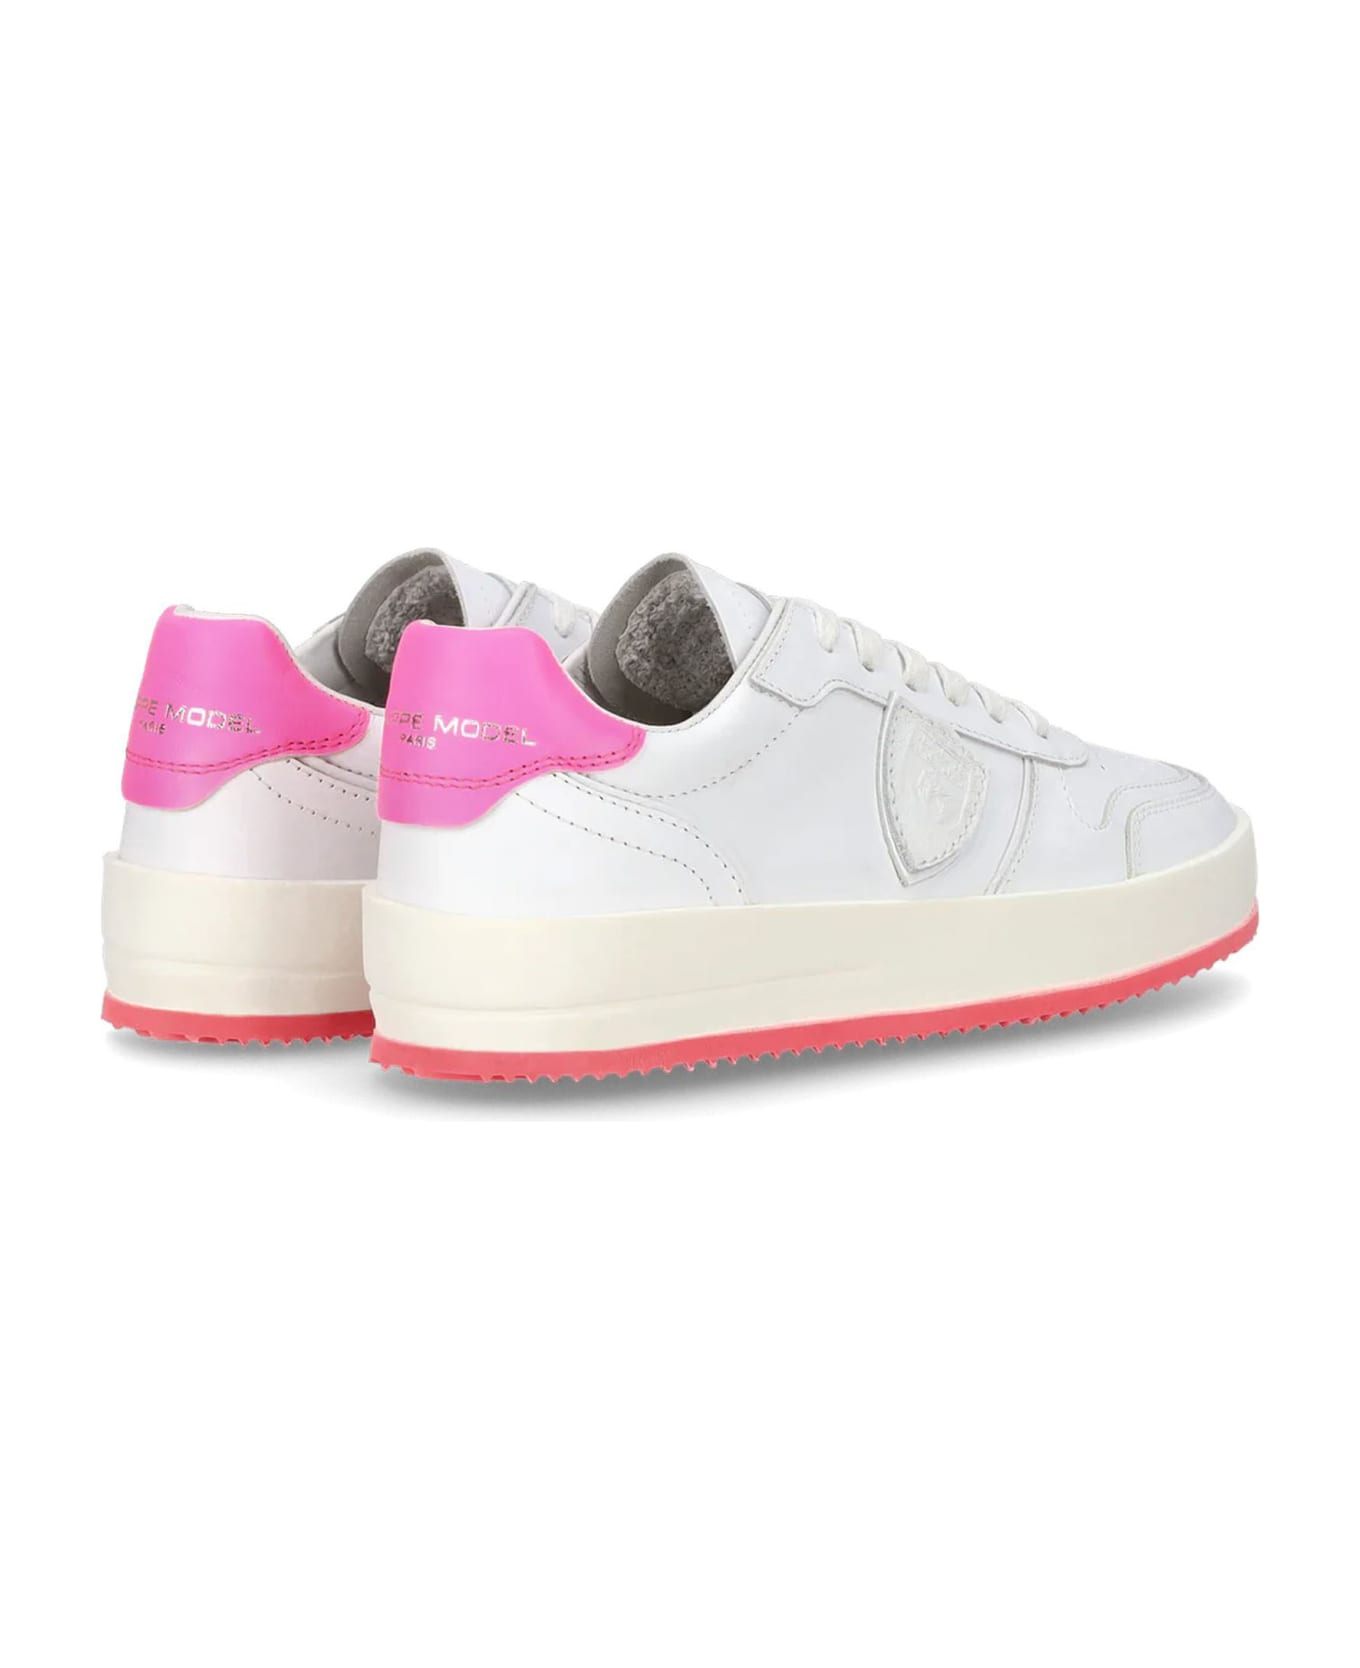 Philippe Model White And Pink Calfskin Sneakers - Bianco+fuxia